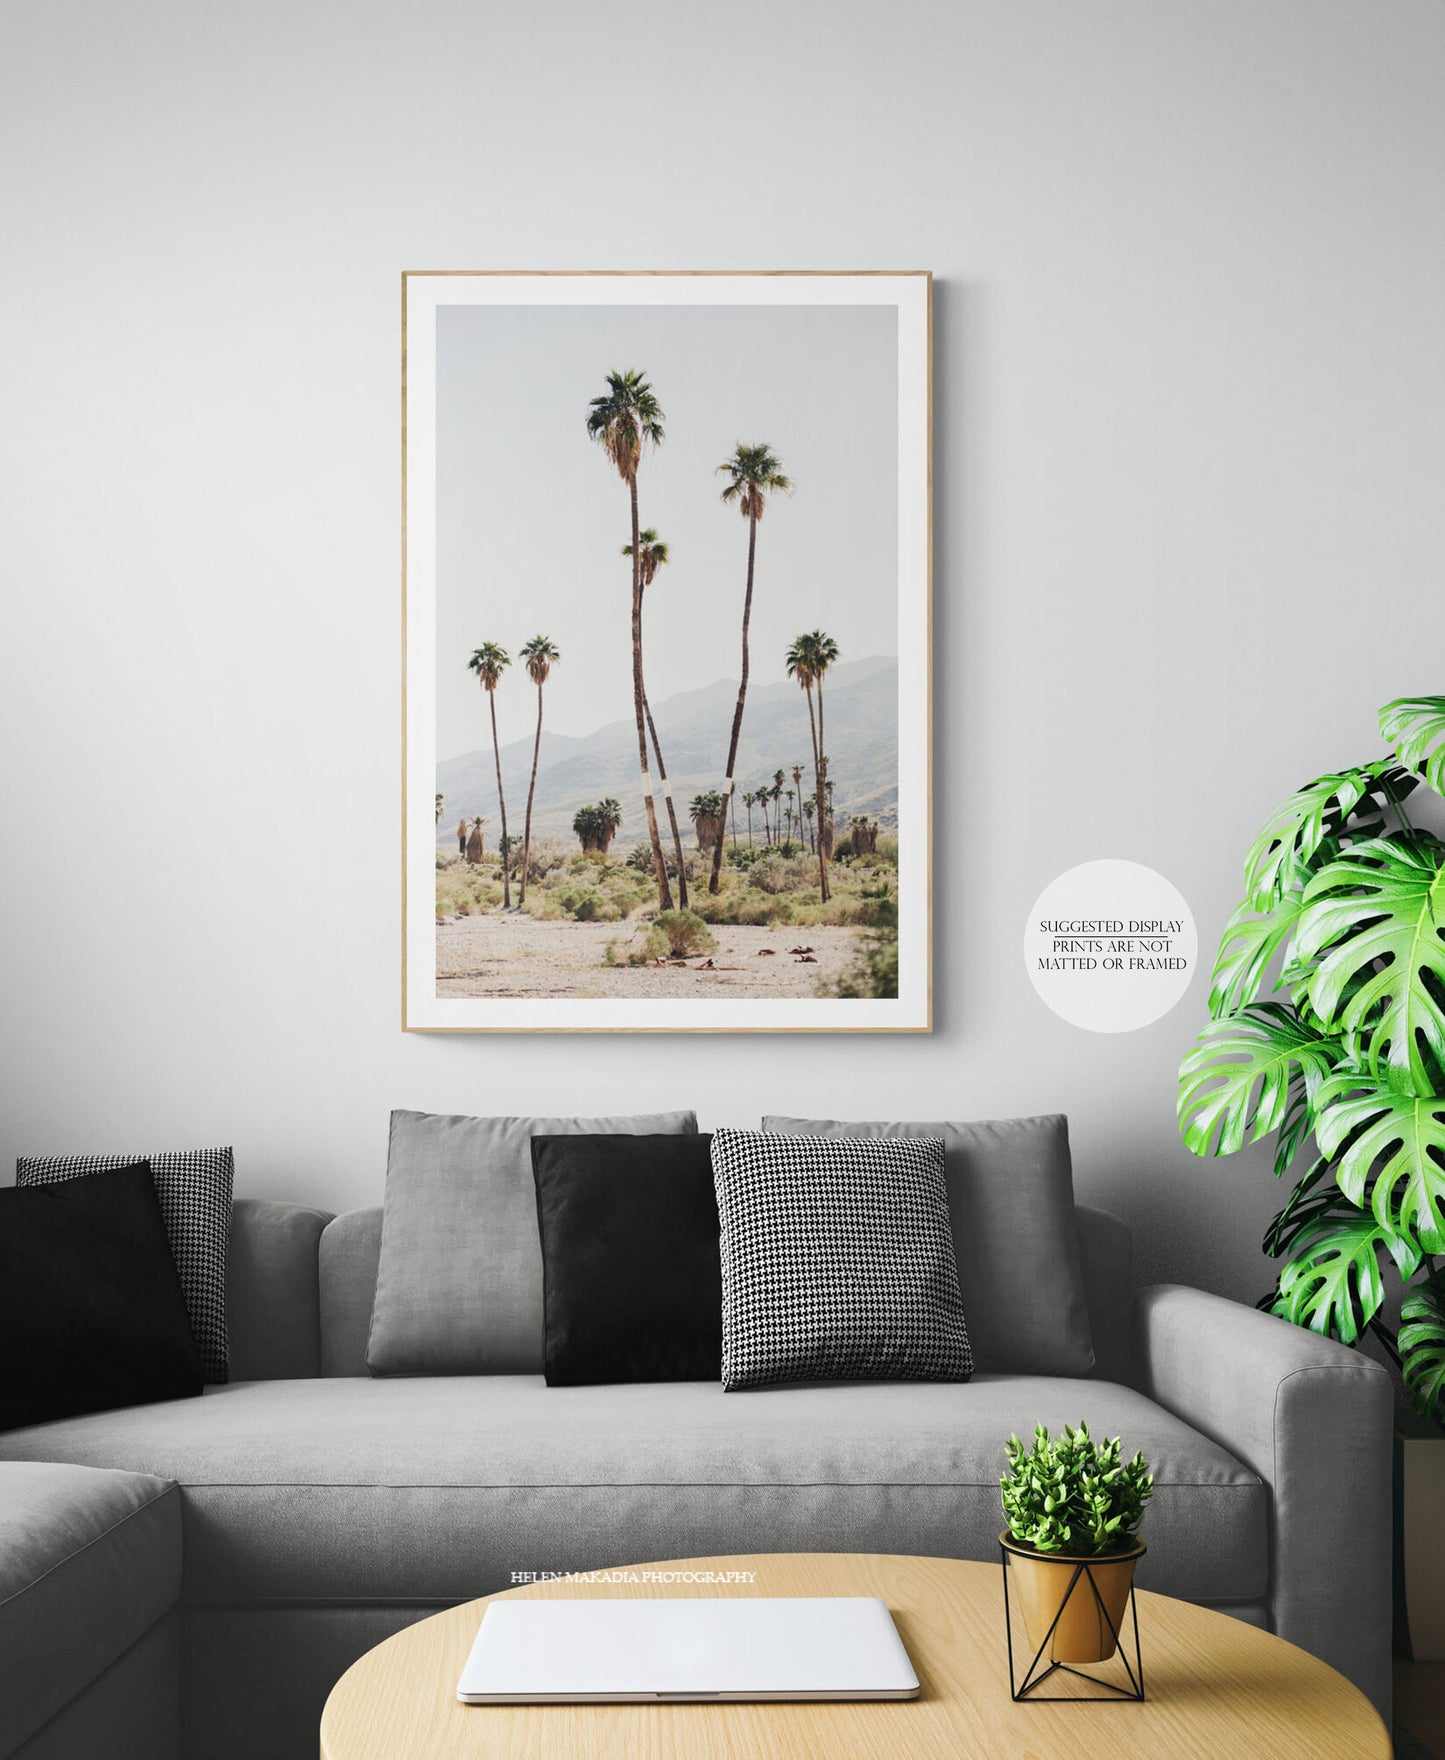 Framed Southwestern Print of Palm Trees in a Living Room